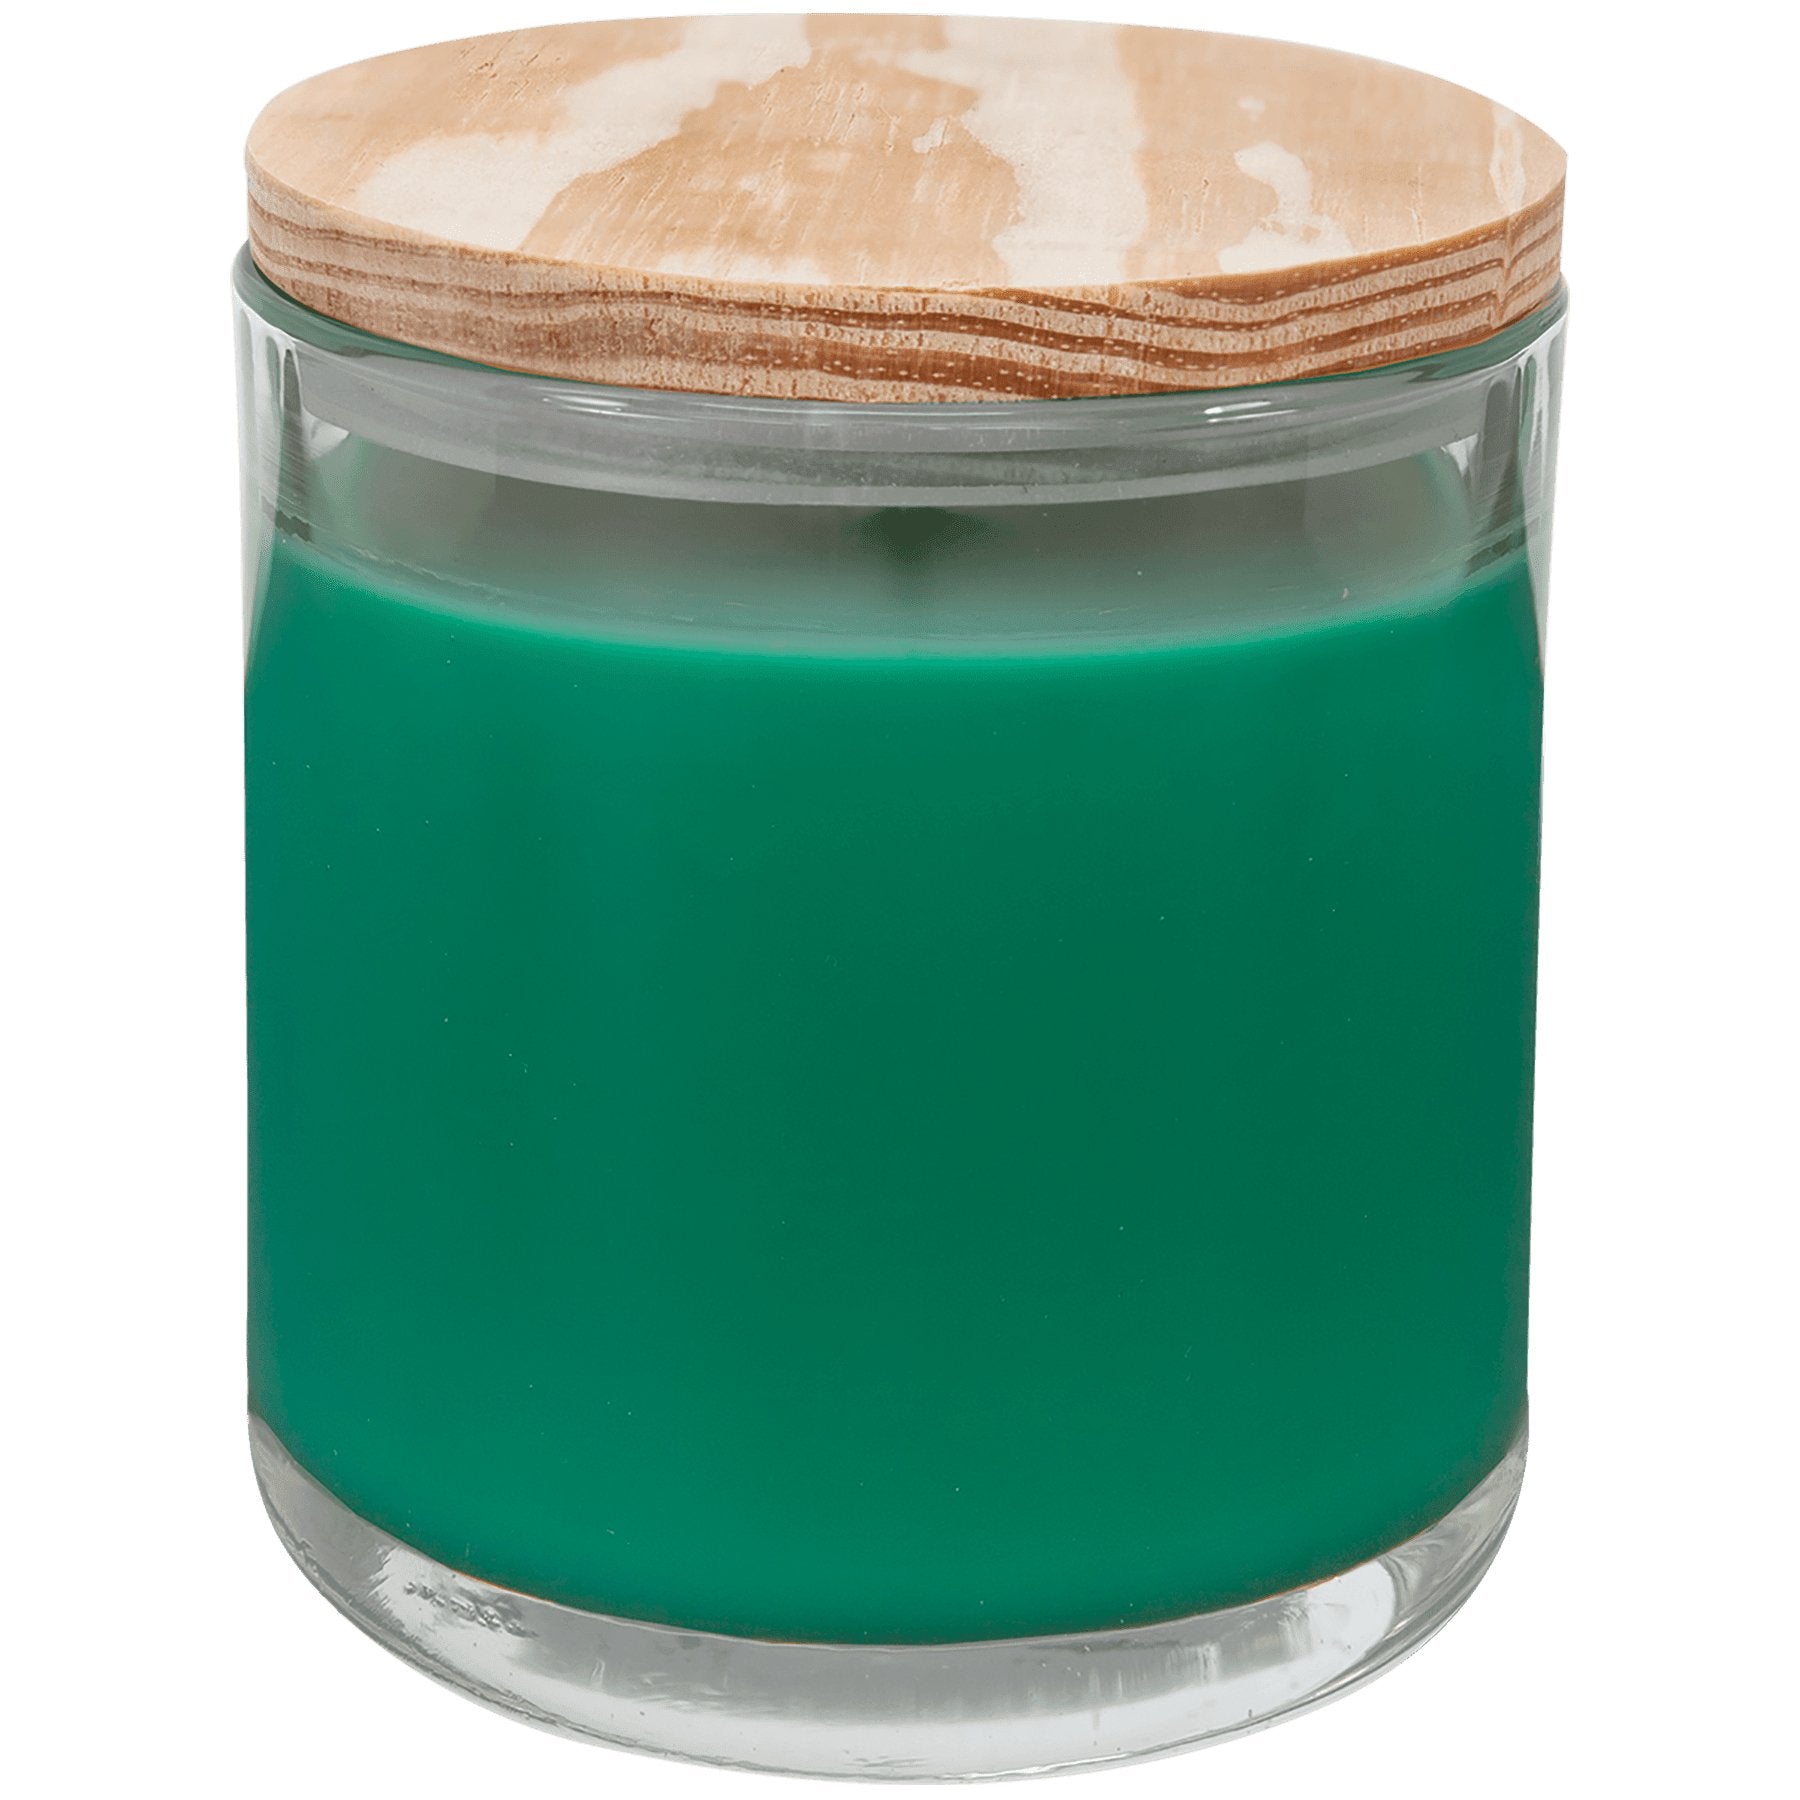 Customizable Scented Candle in a Glass Holder with Wood Lid - Legacy Creator IncFresh Pine